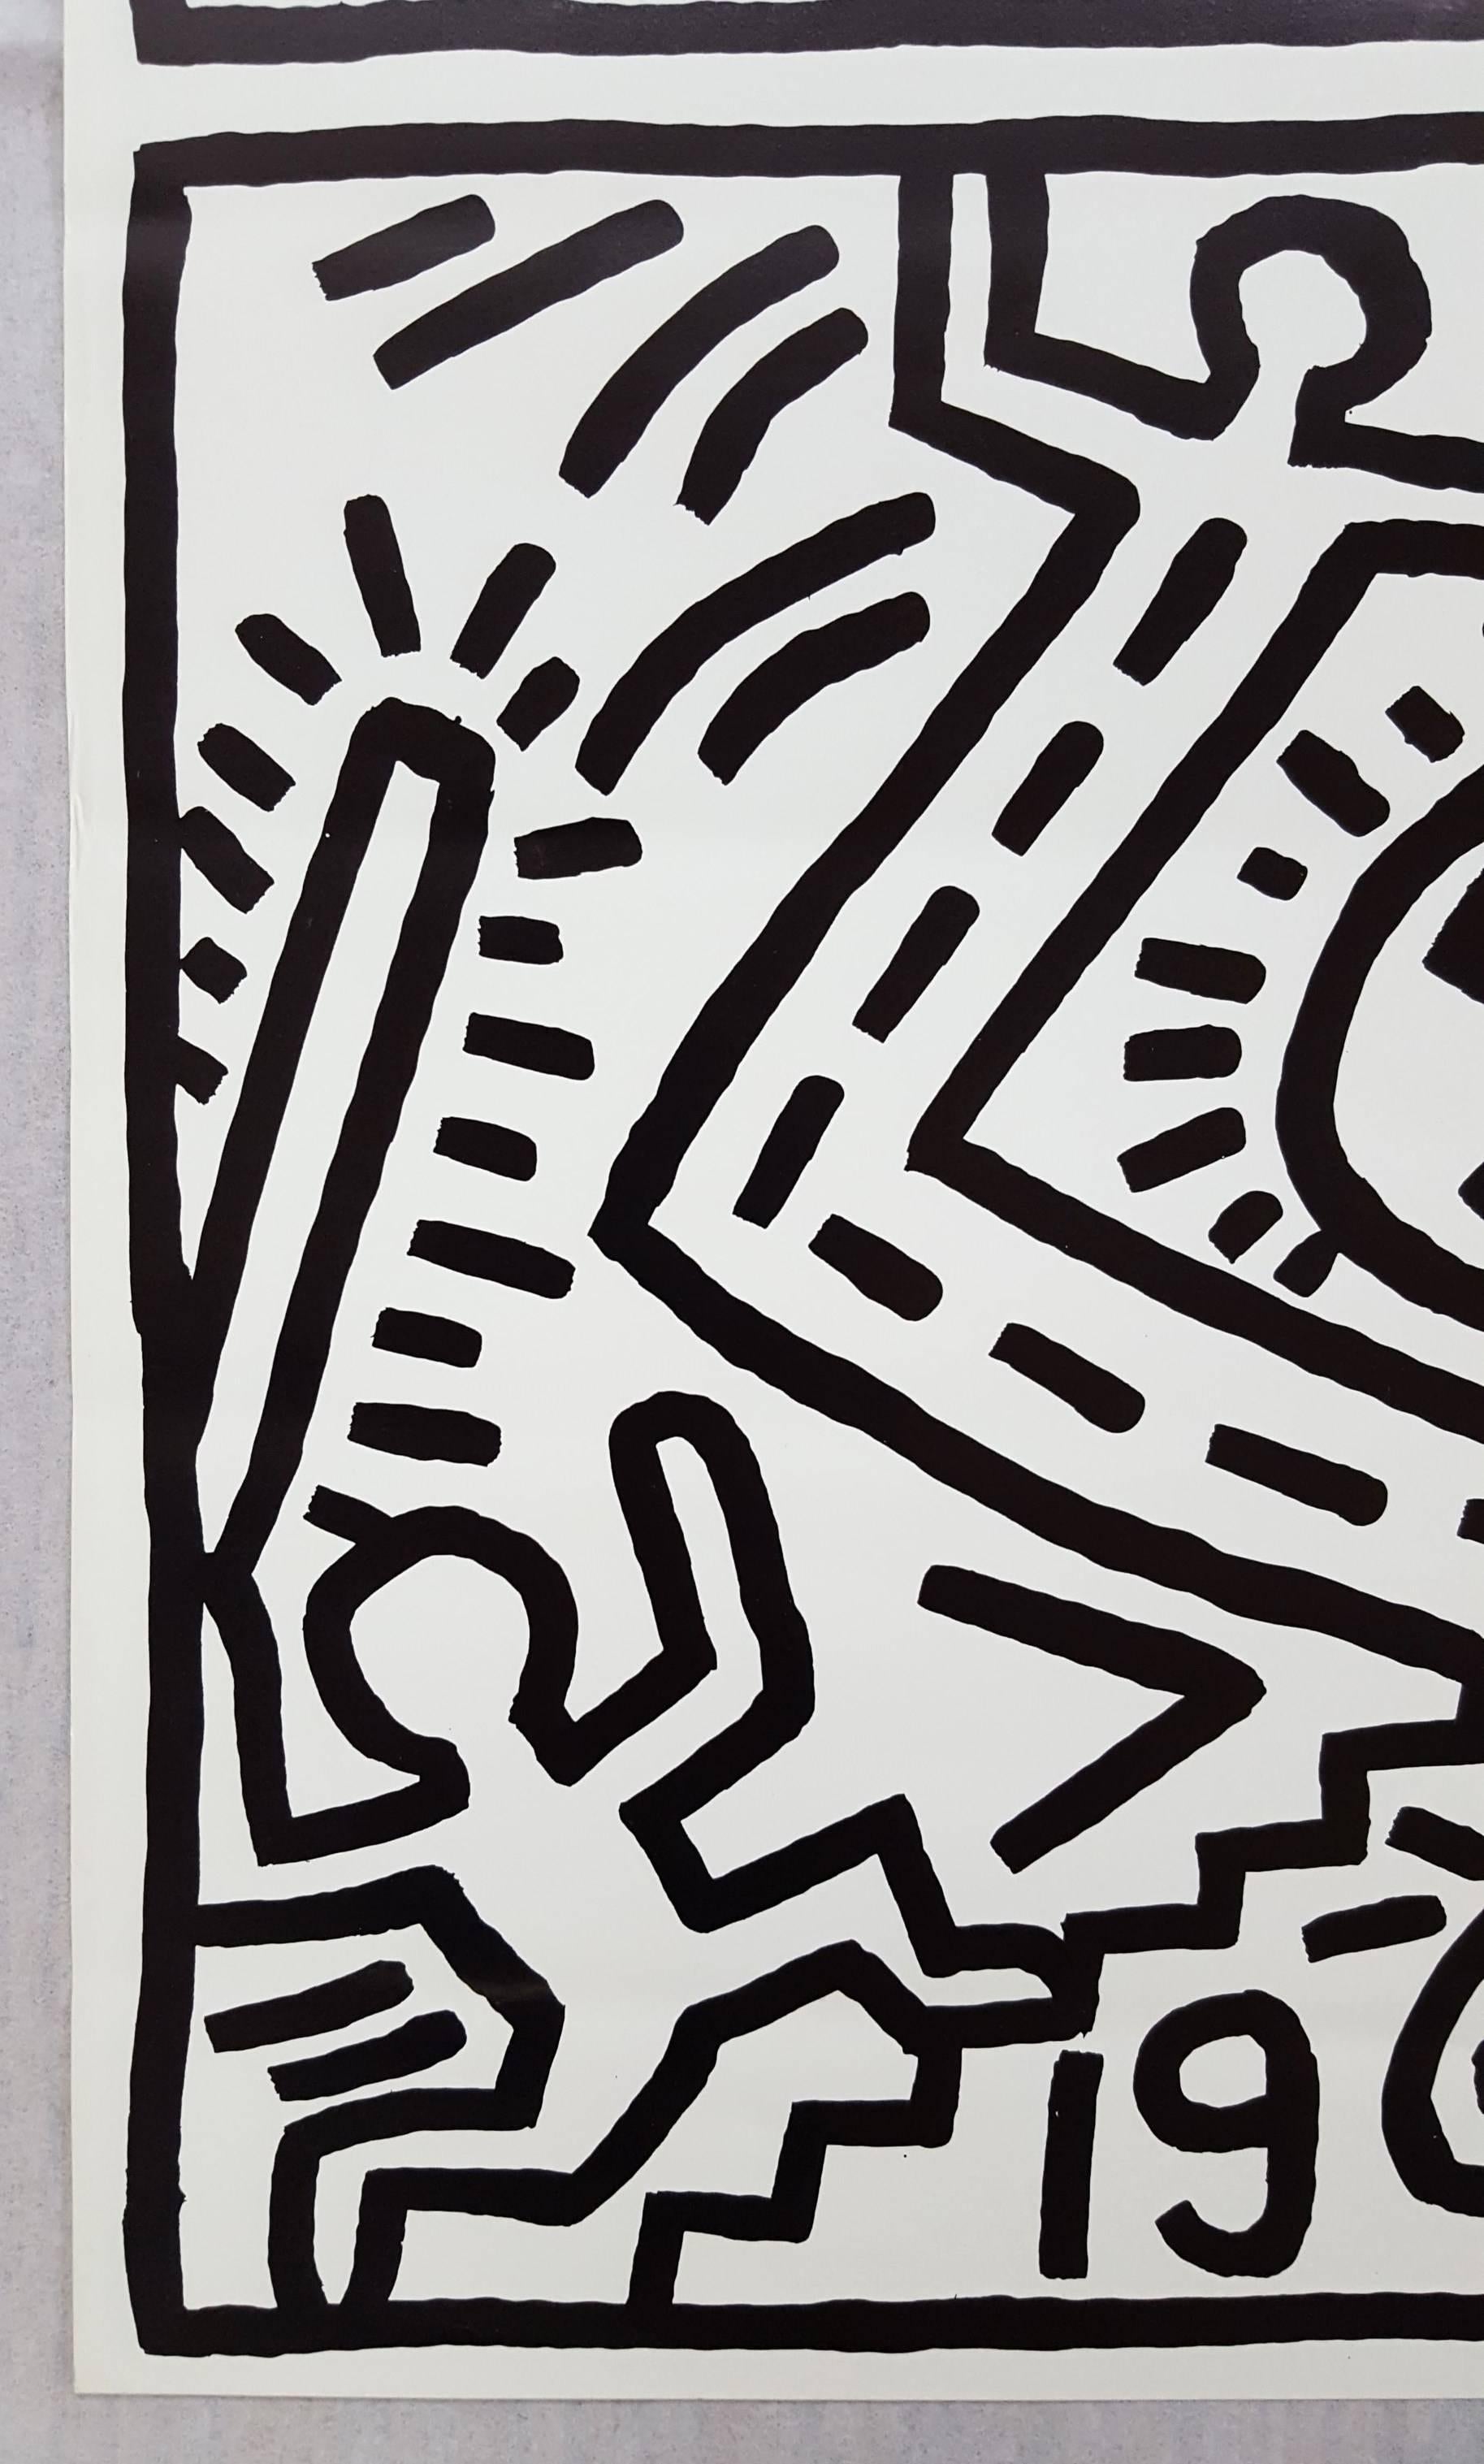 Poster for Nuclear Disarmament - Print by Keith Haring